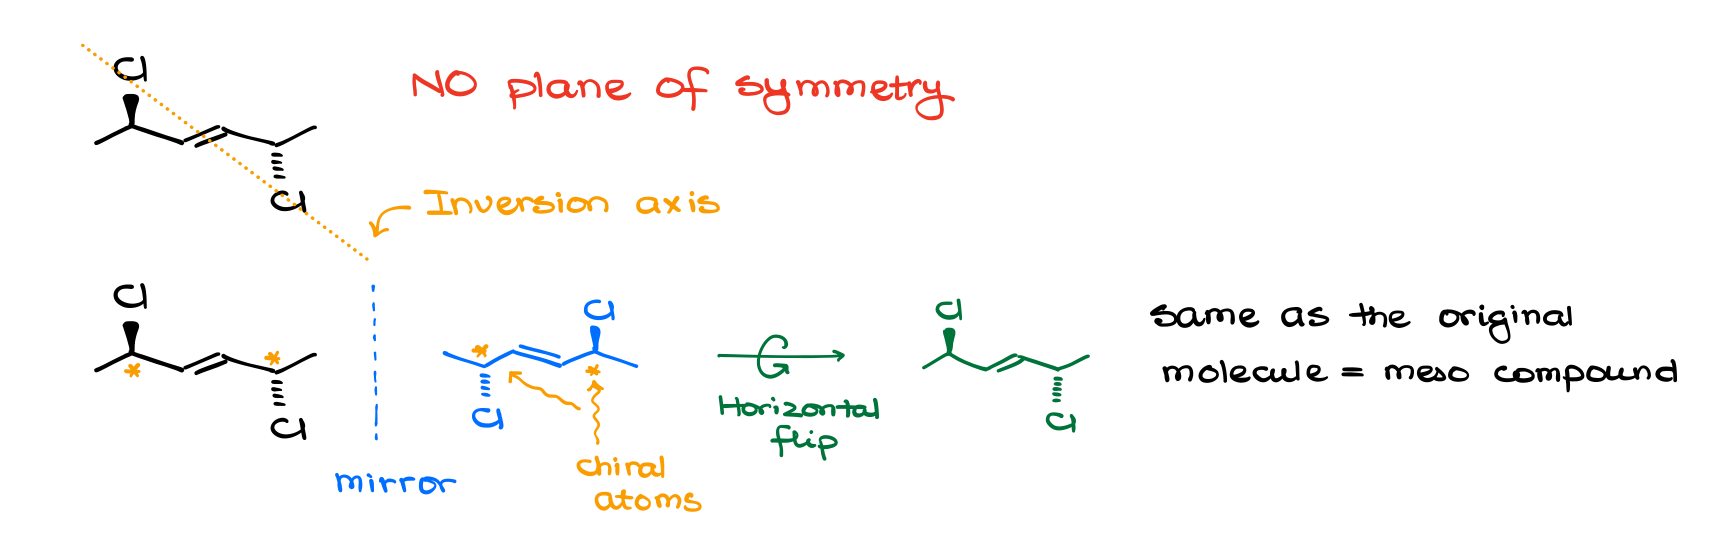 plane of symmetry is not a requirement for a meso compound